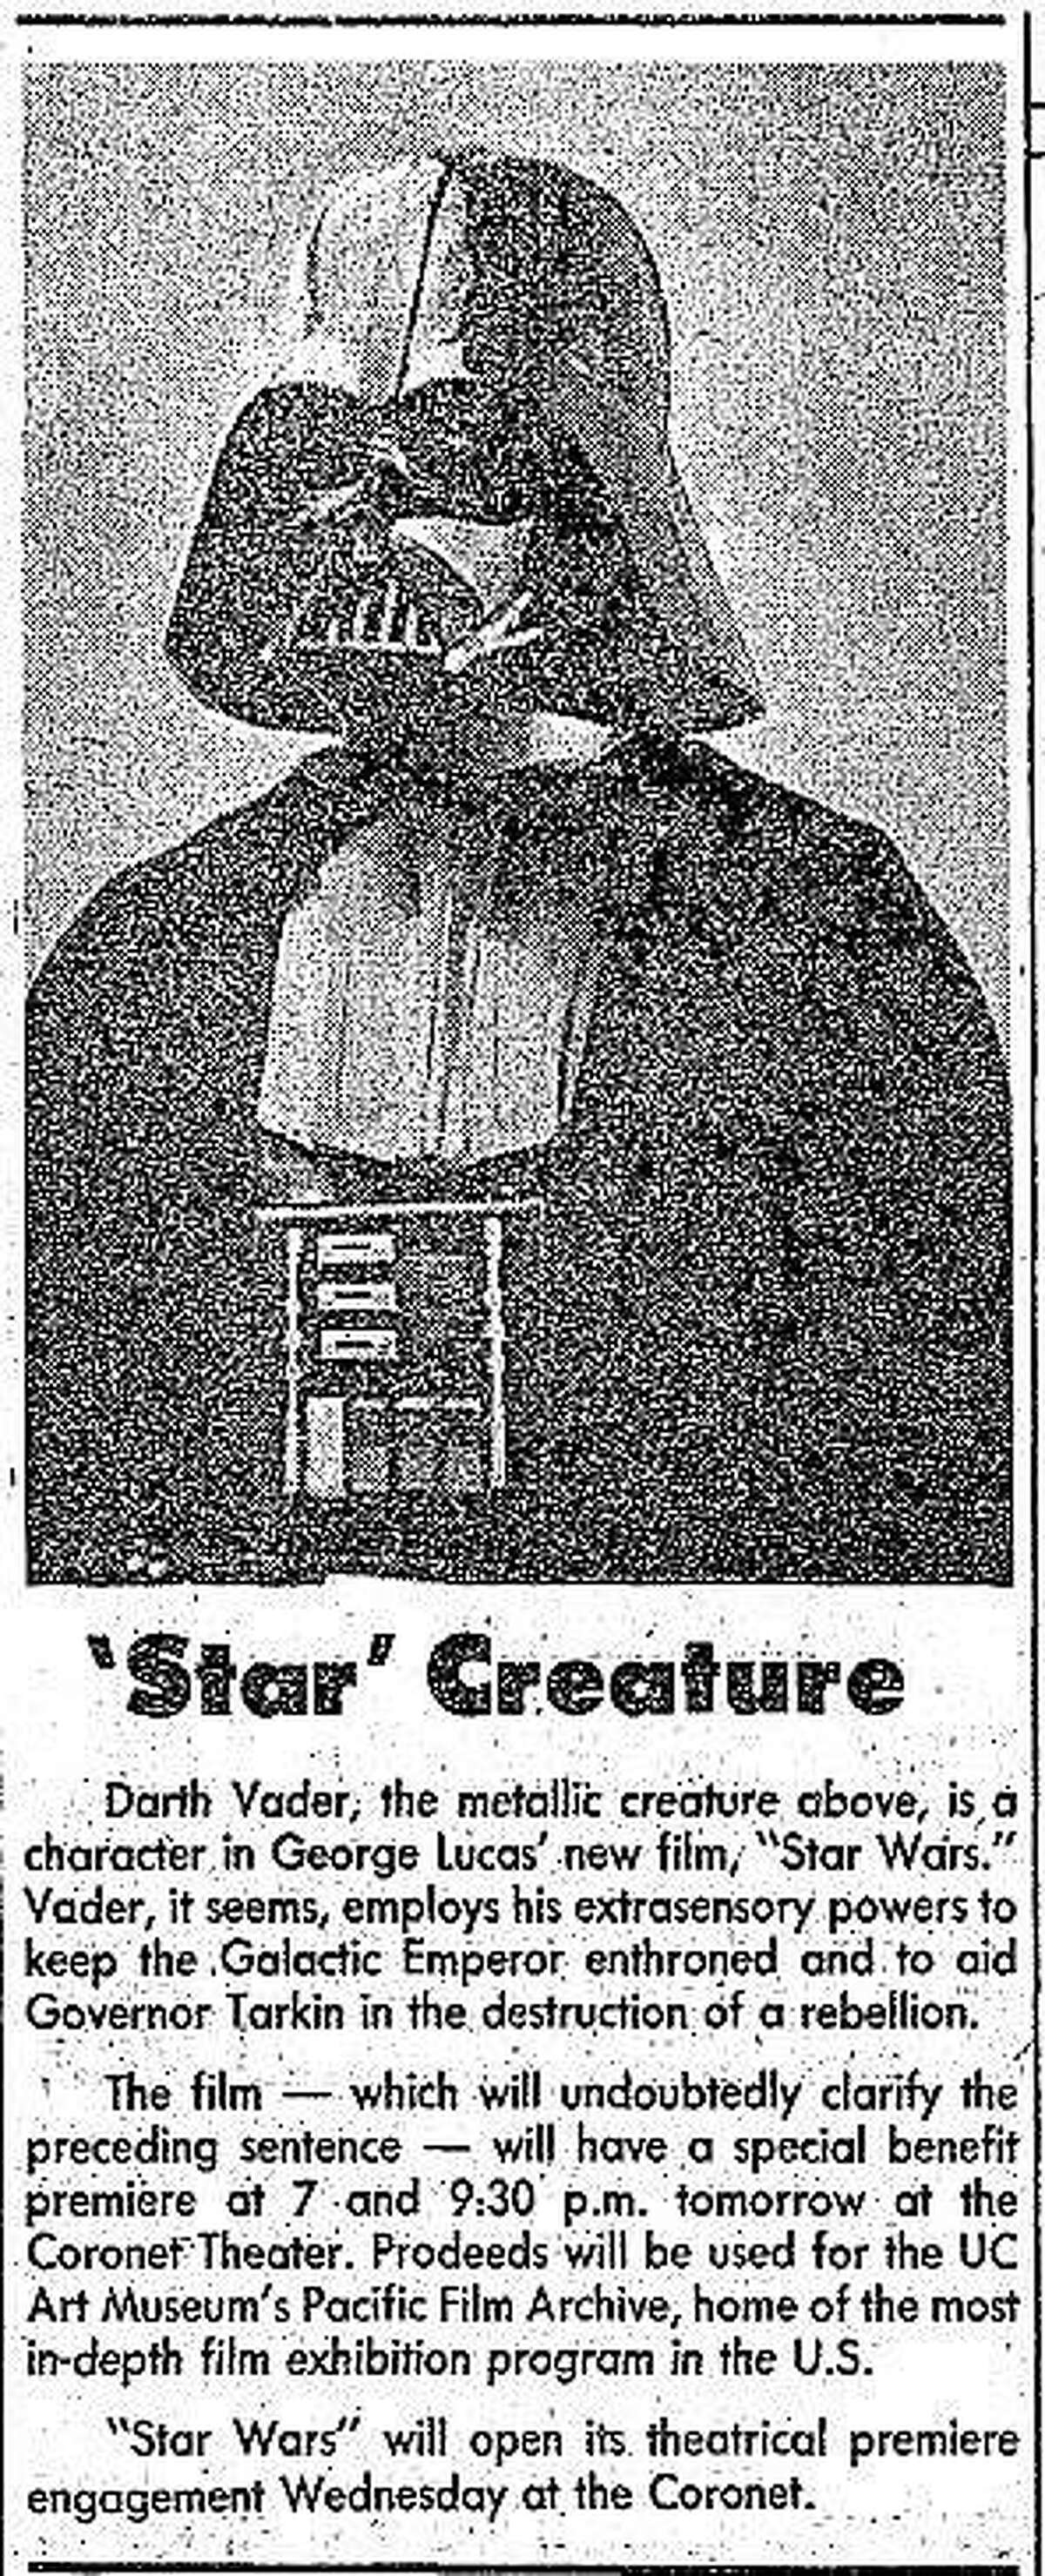 Darth Vader, as featured in The Chronicle before the release of "Star Wars."